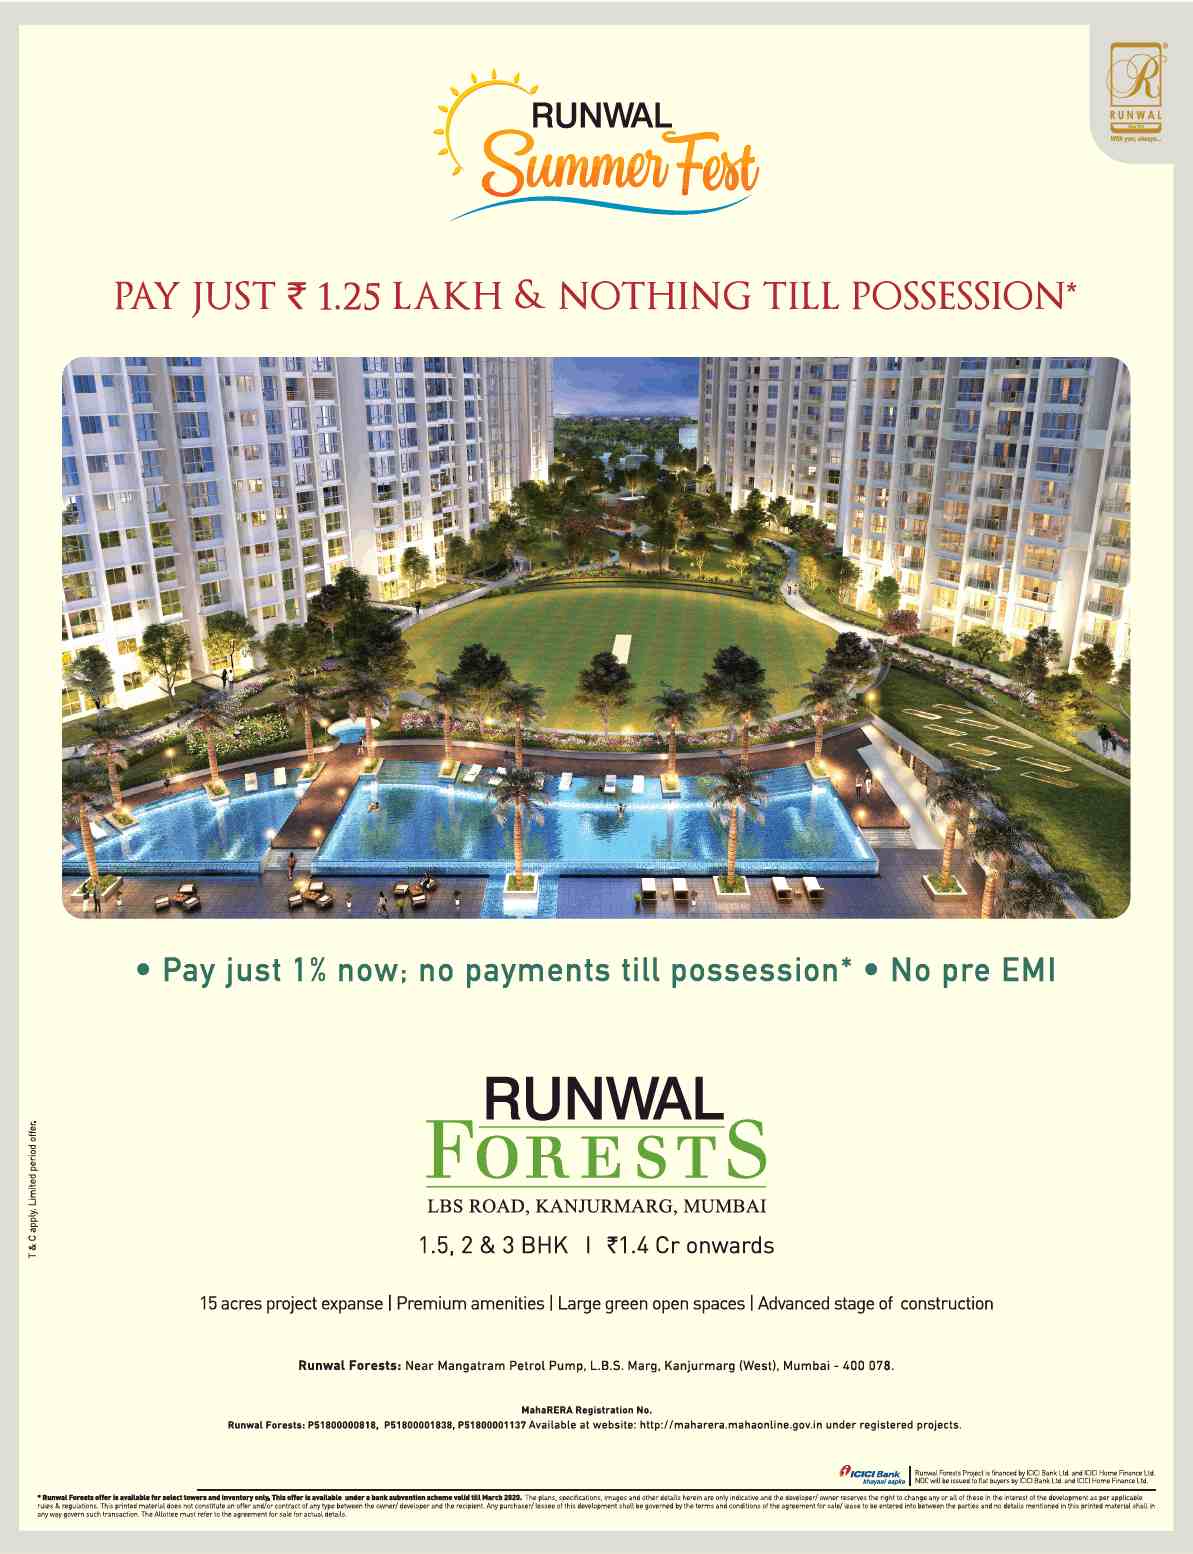 Pay 1% now and no payments till possession at Runwal Forests in Mumbai Update